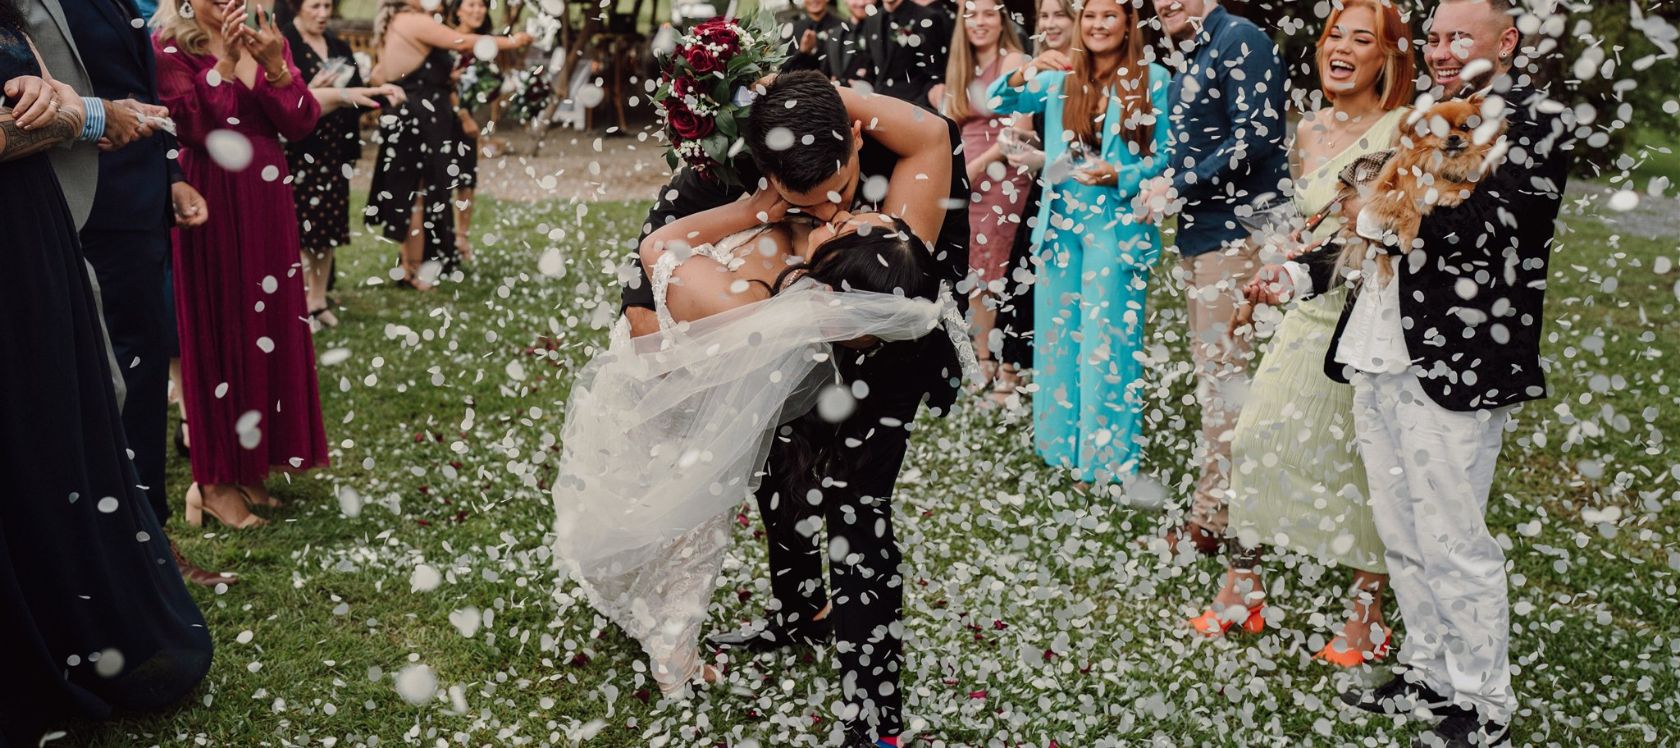 Bride and groom embrace and kiss as confetti is thrown on them